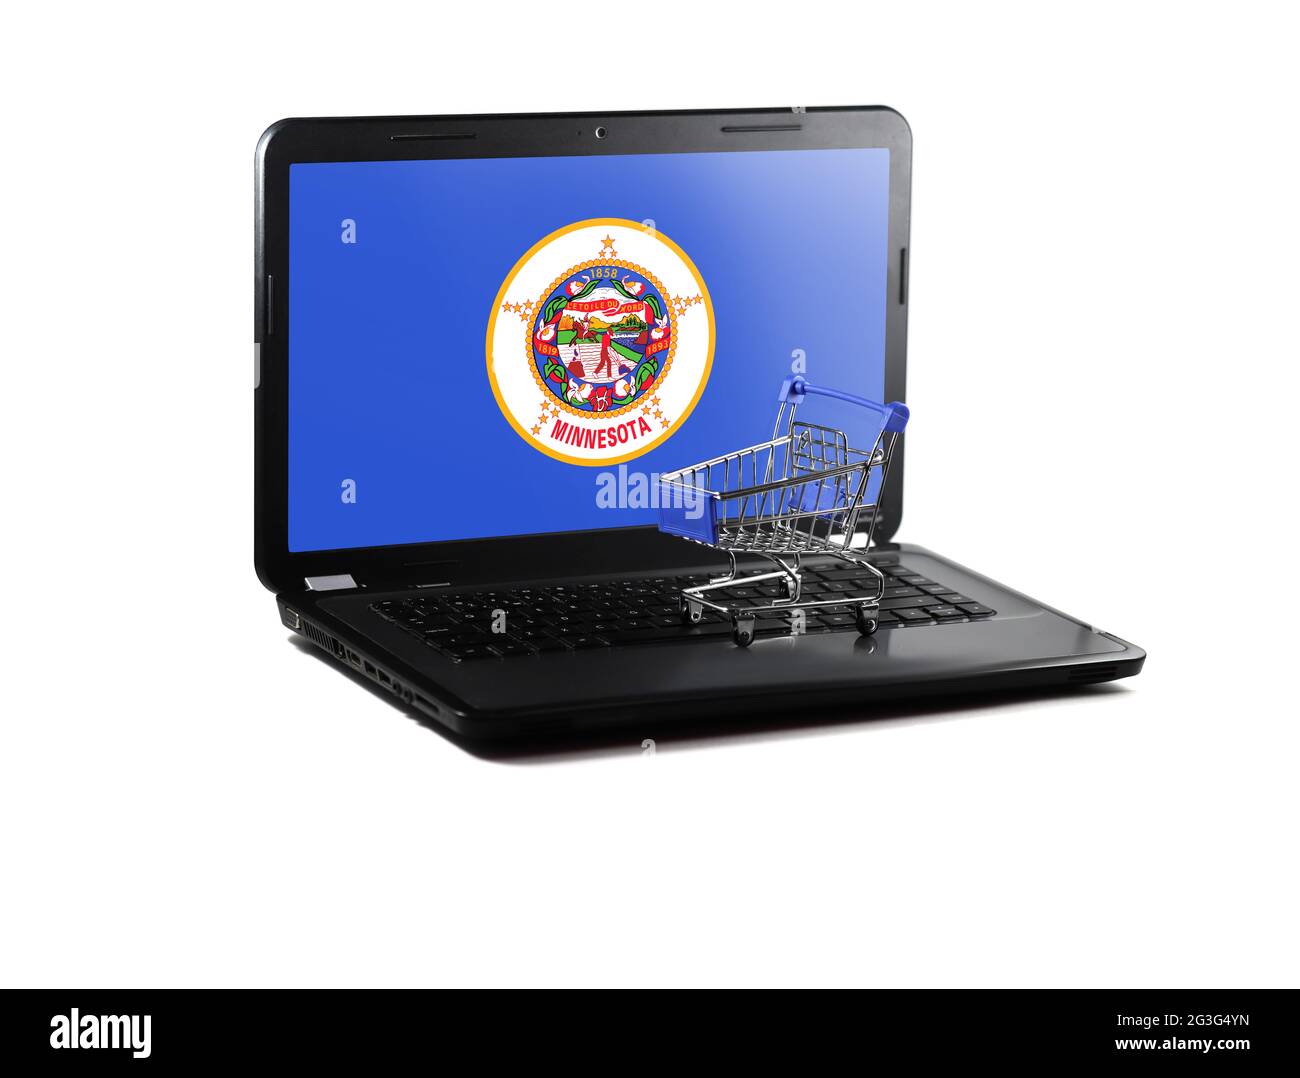 Isolated on white background laptop with State of Minnesota flag on display, online shopping sale concept Stock Photo